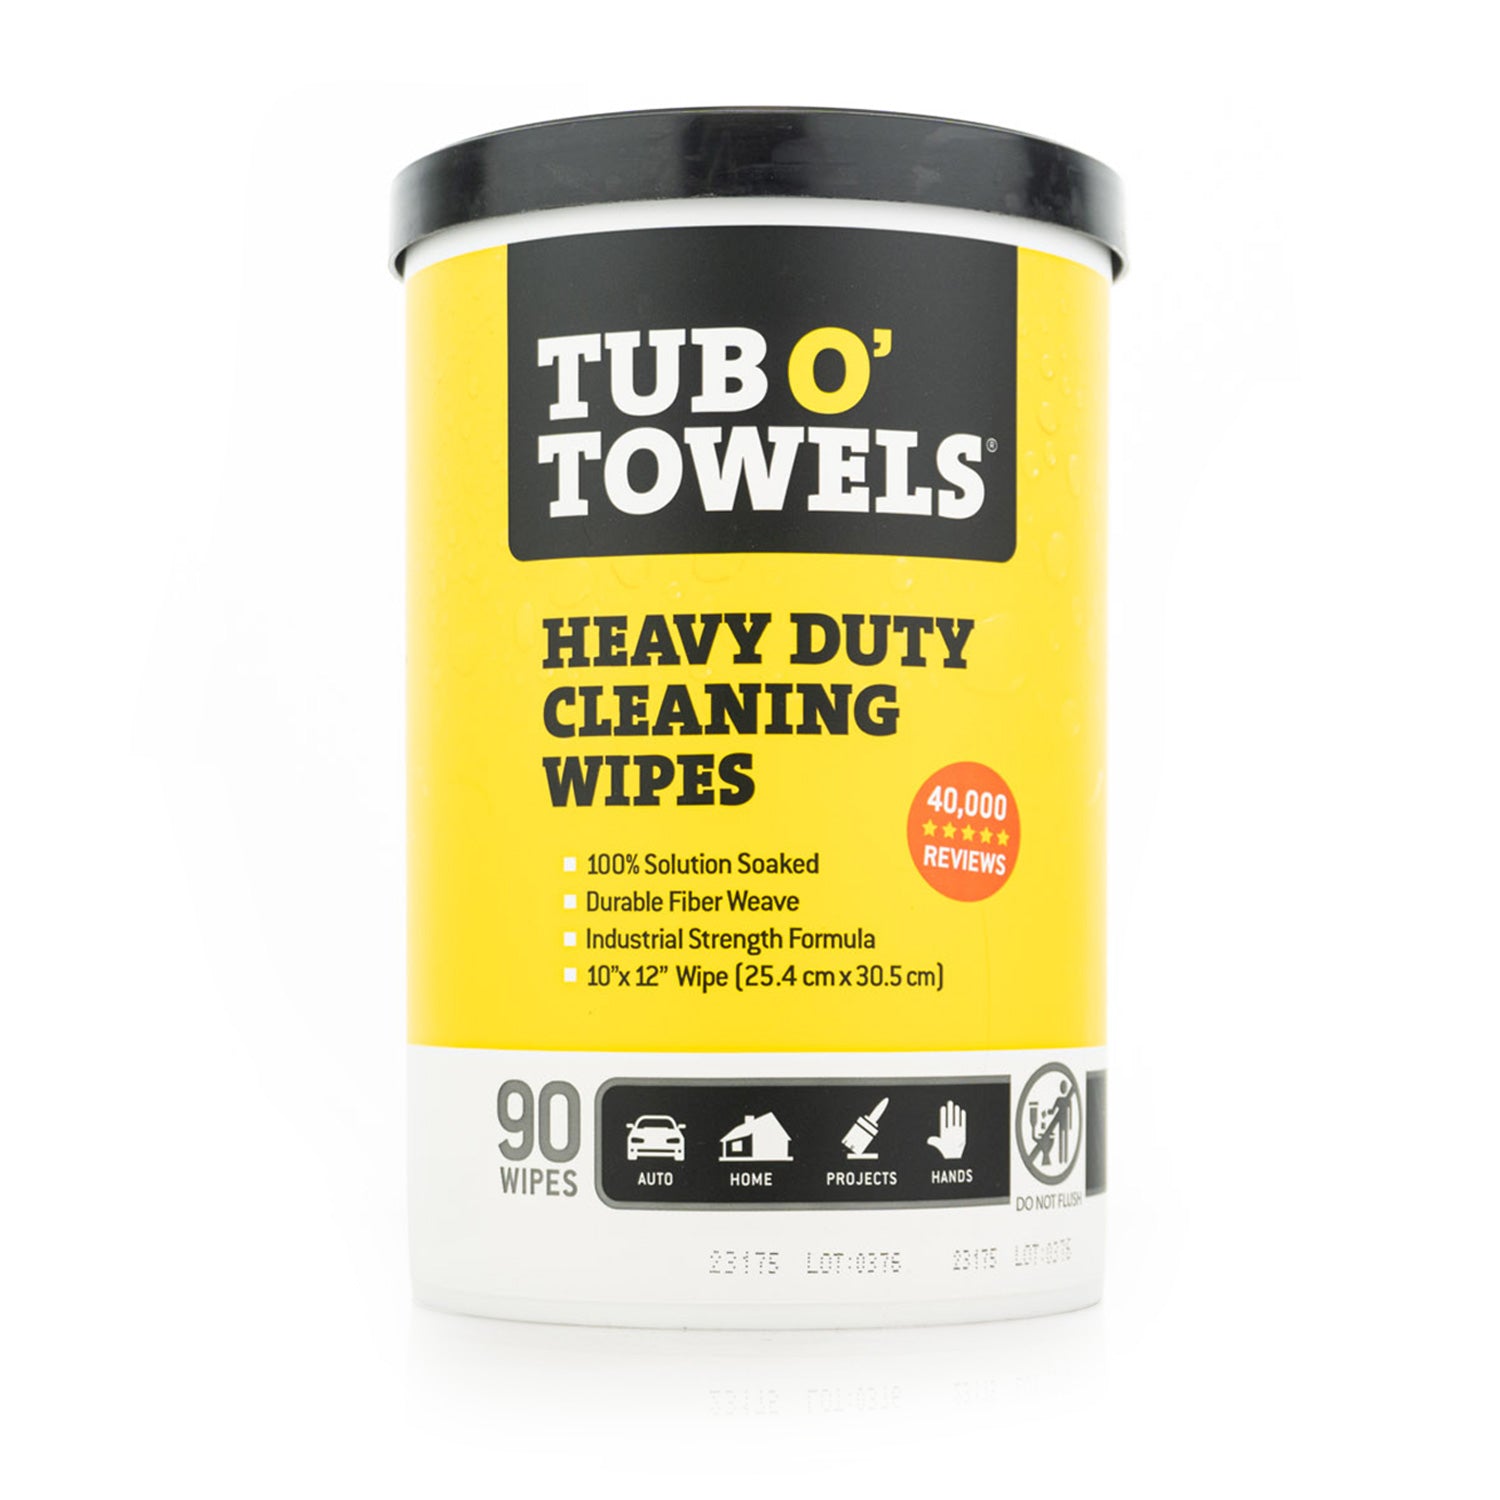 Reviews for Tub O' Towels Citrus Scent Heavy-Duty Cleaning Wipes (90-Count)